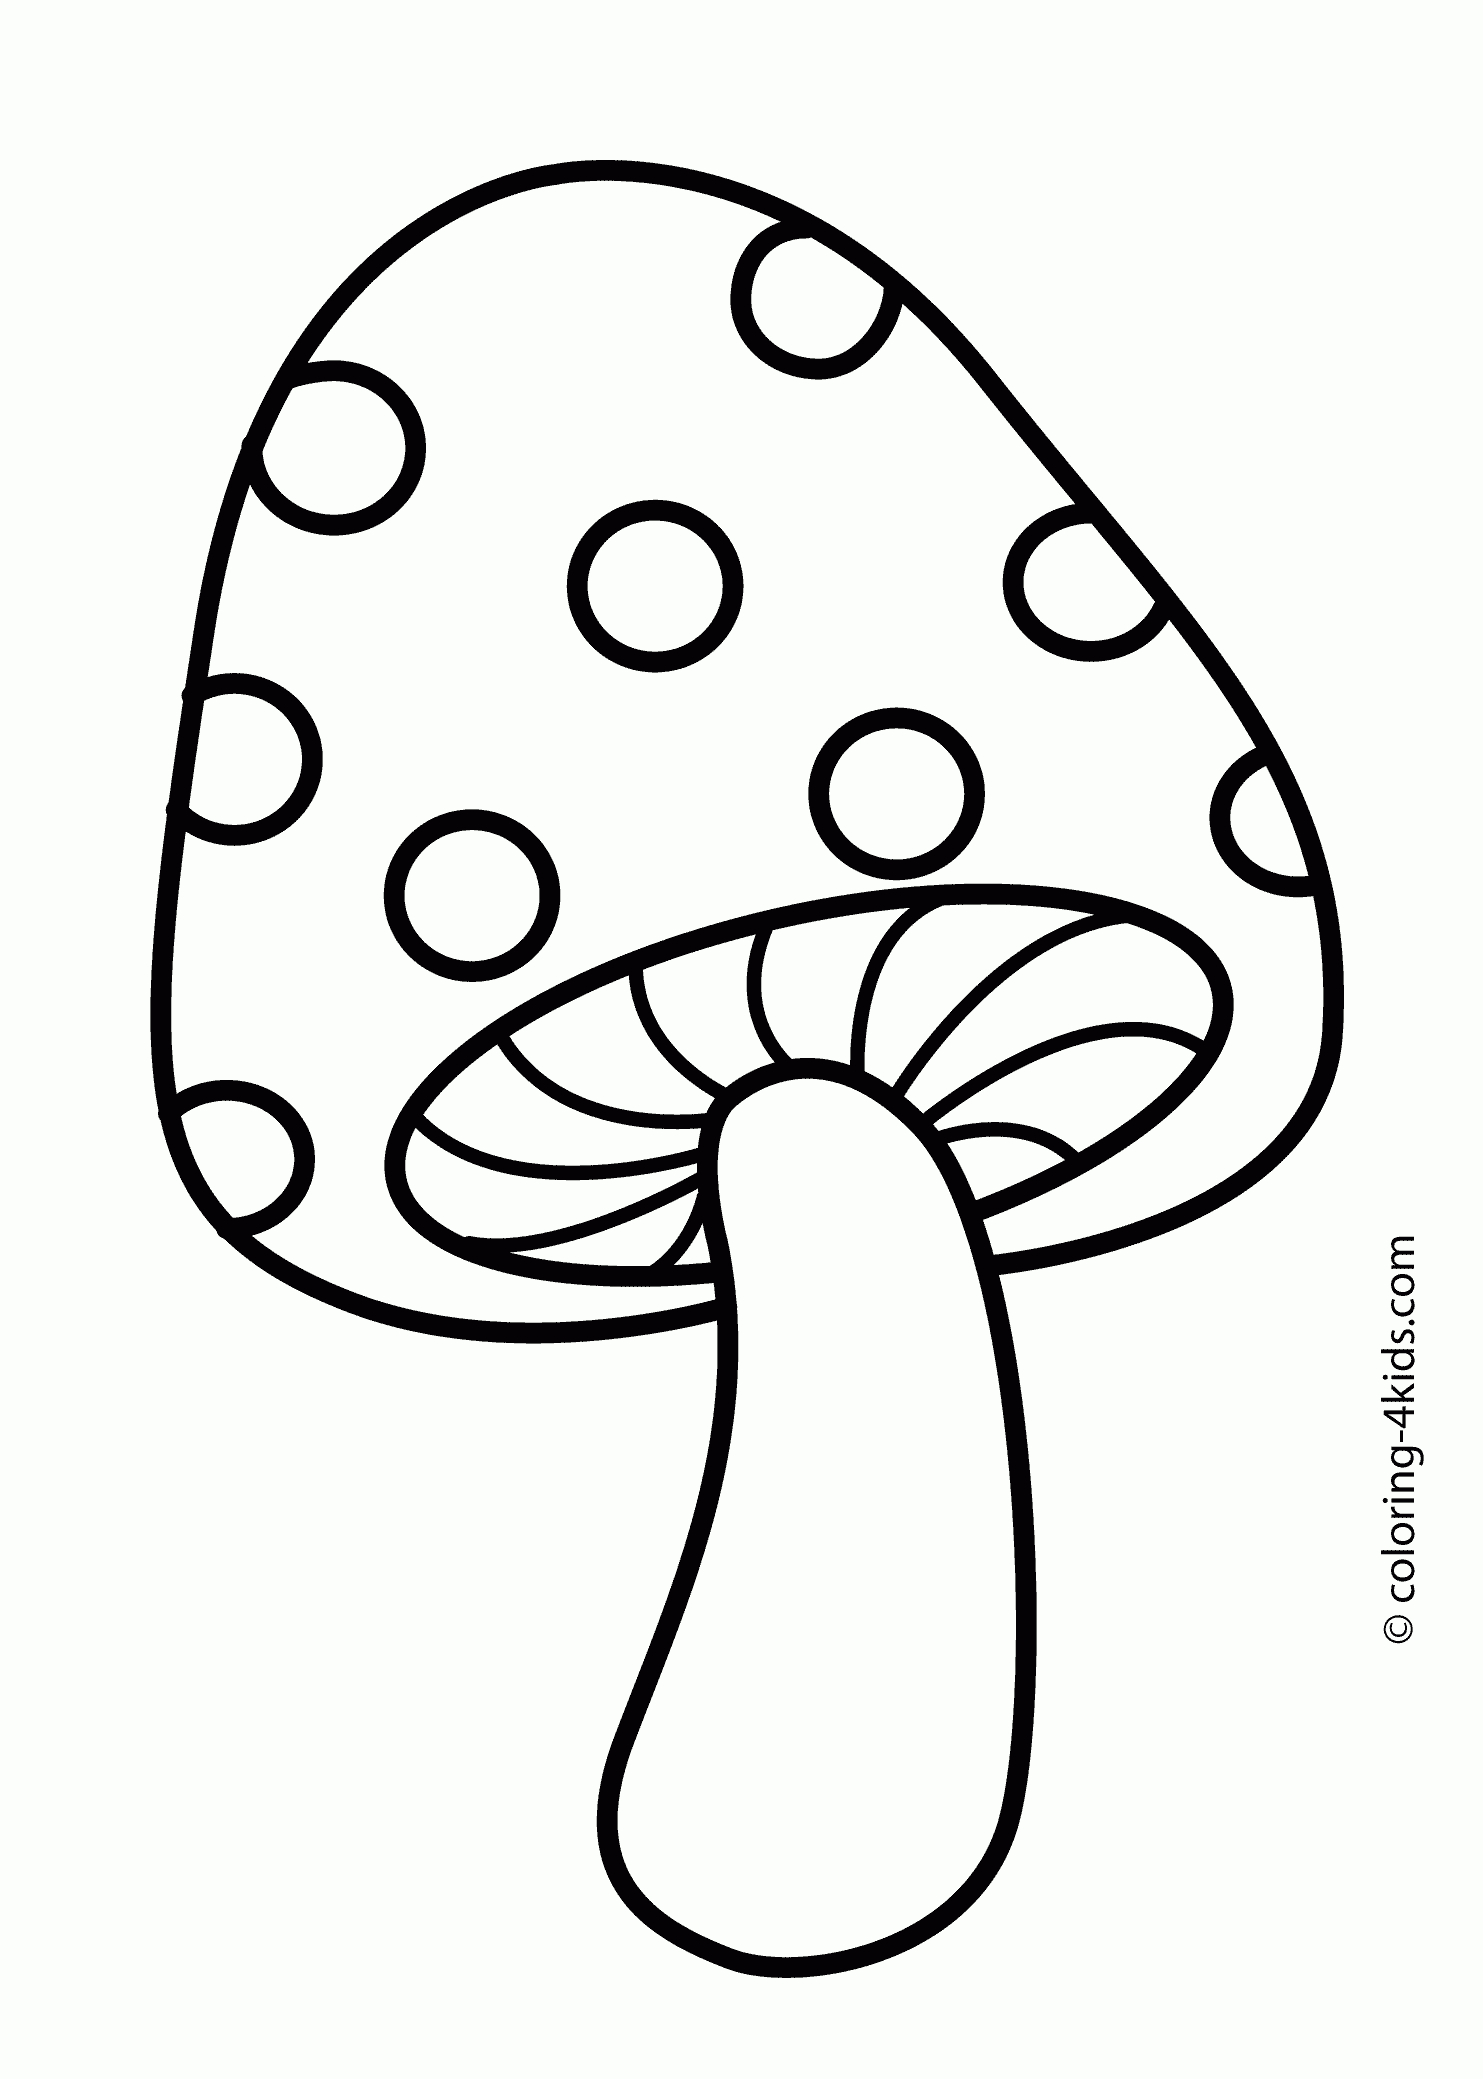 Nature Nice Mushroom Coloring Page For Kids, Printable Free - Free Printable Mushroom Coloring Pages